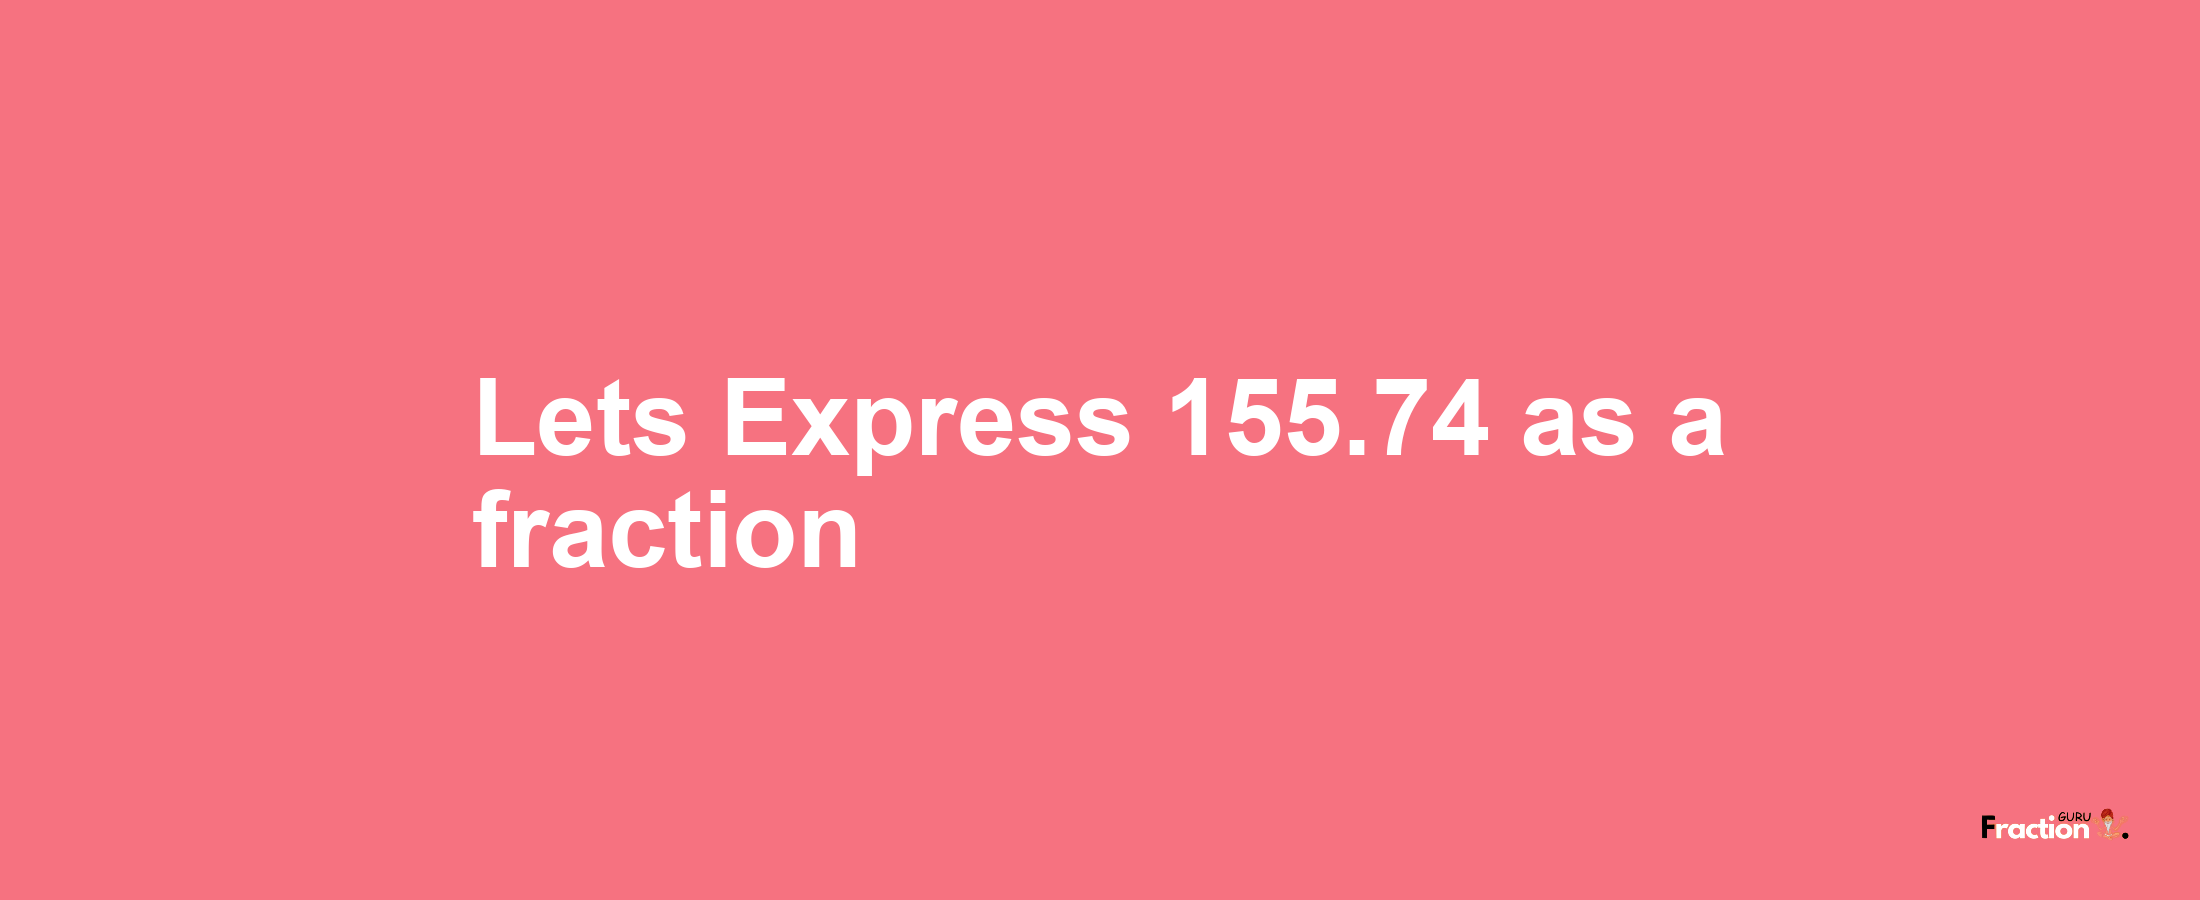 Lets Express 155.74 as afraction